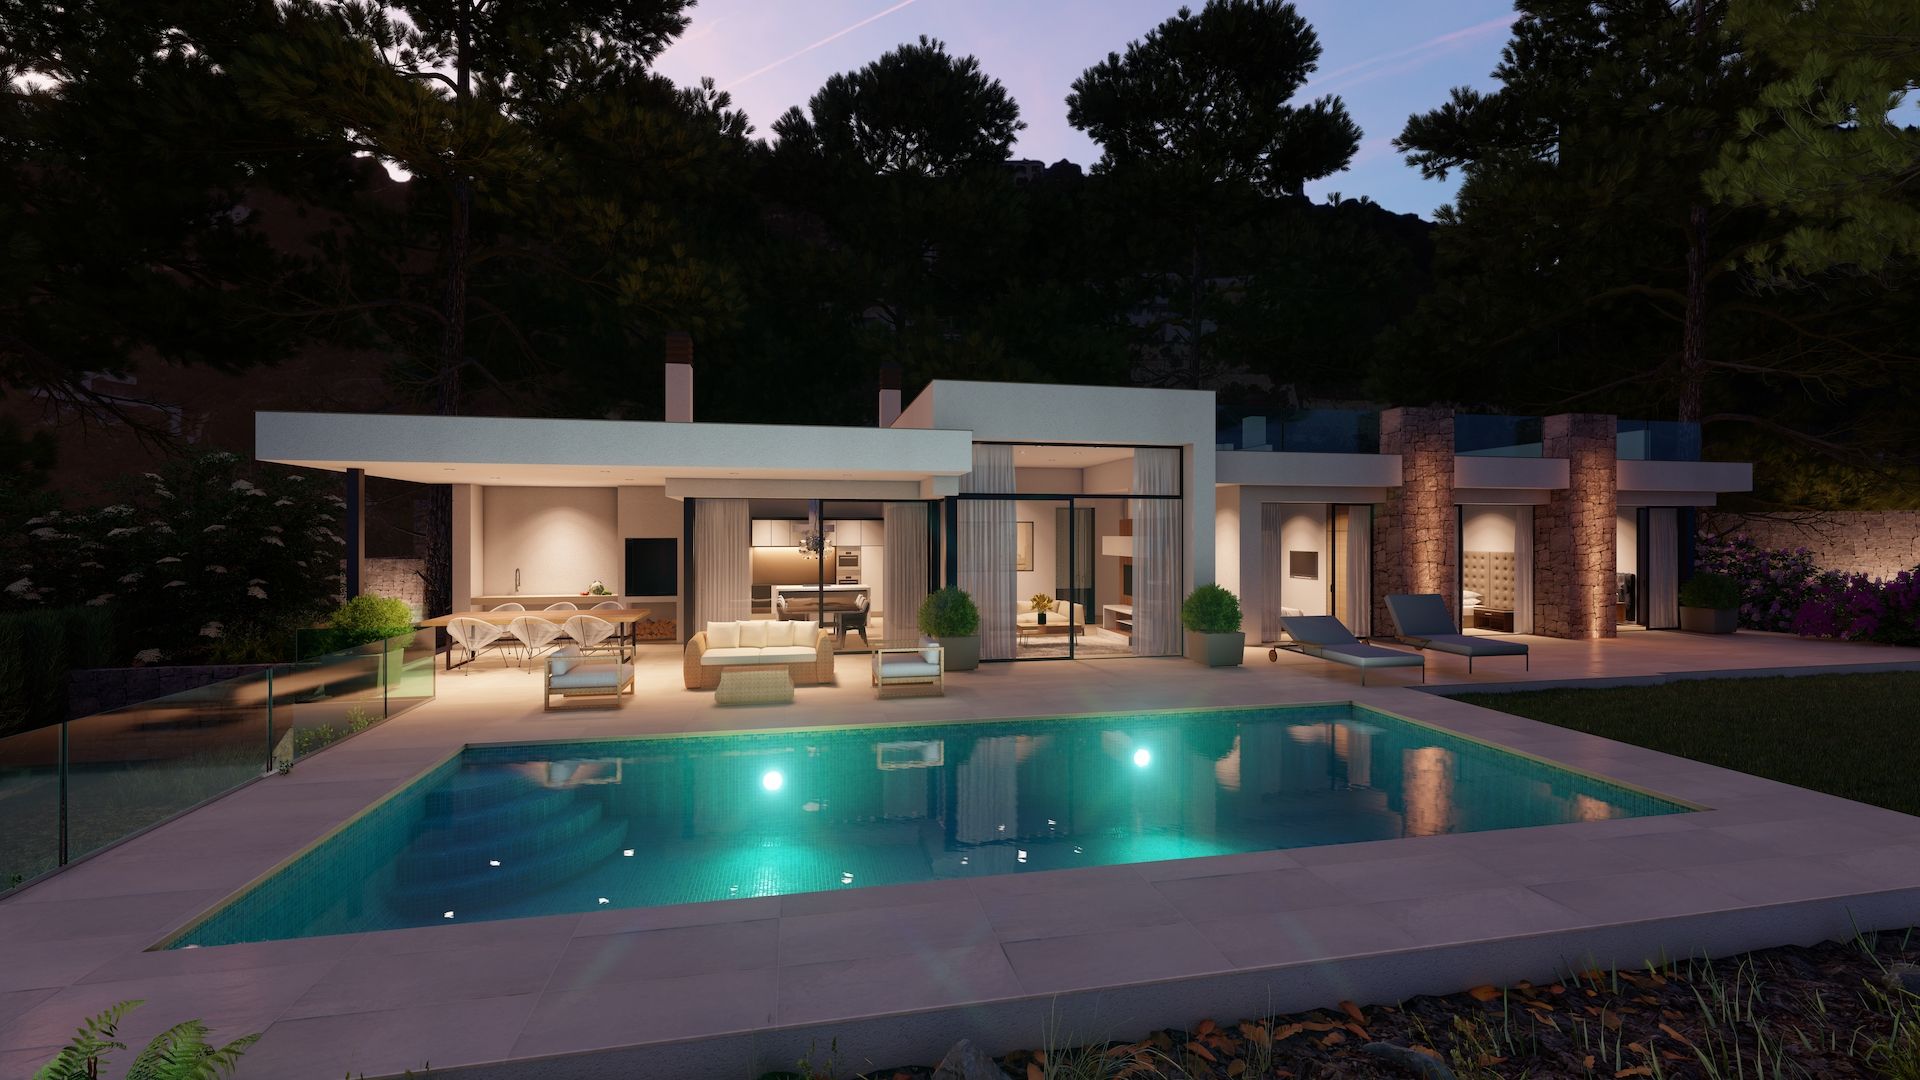 Photogallery - 4 - Exceptional homes in the Costa Blanca. Unparalleled Service. Exceptional properties in the Costa Blanca